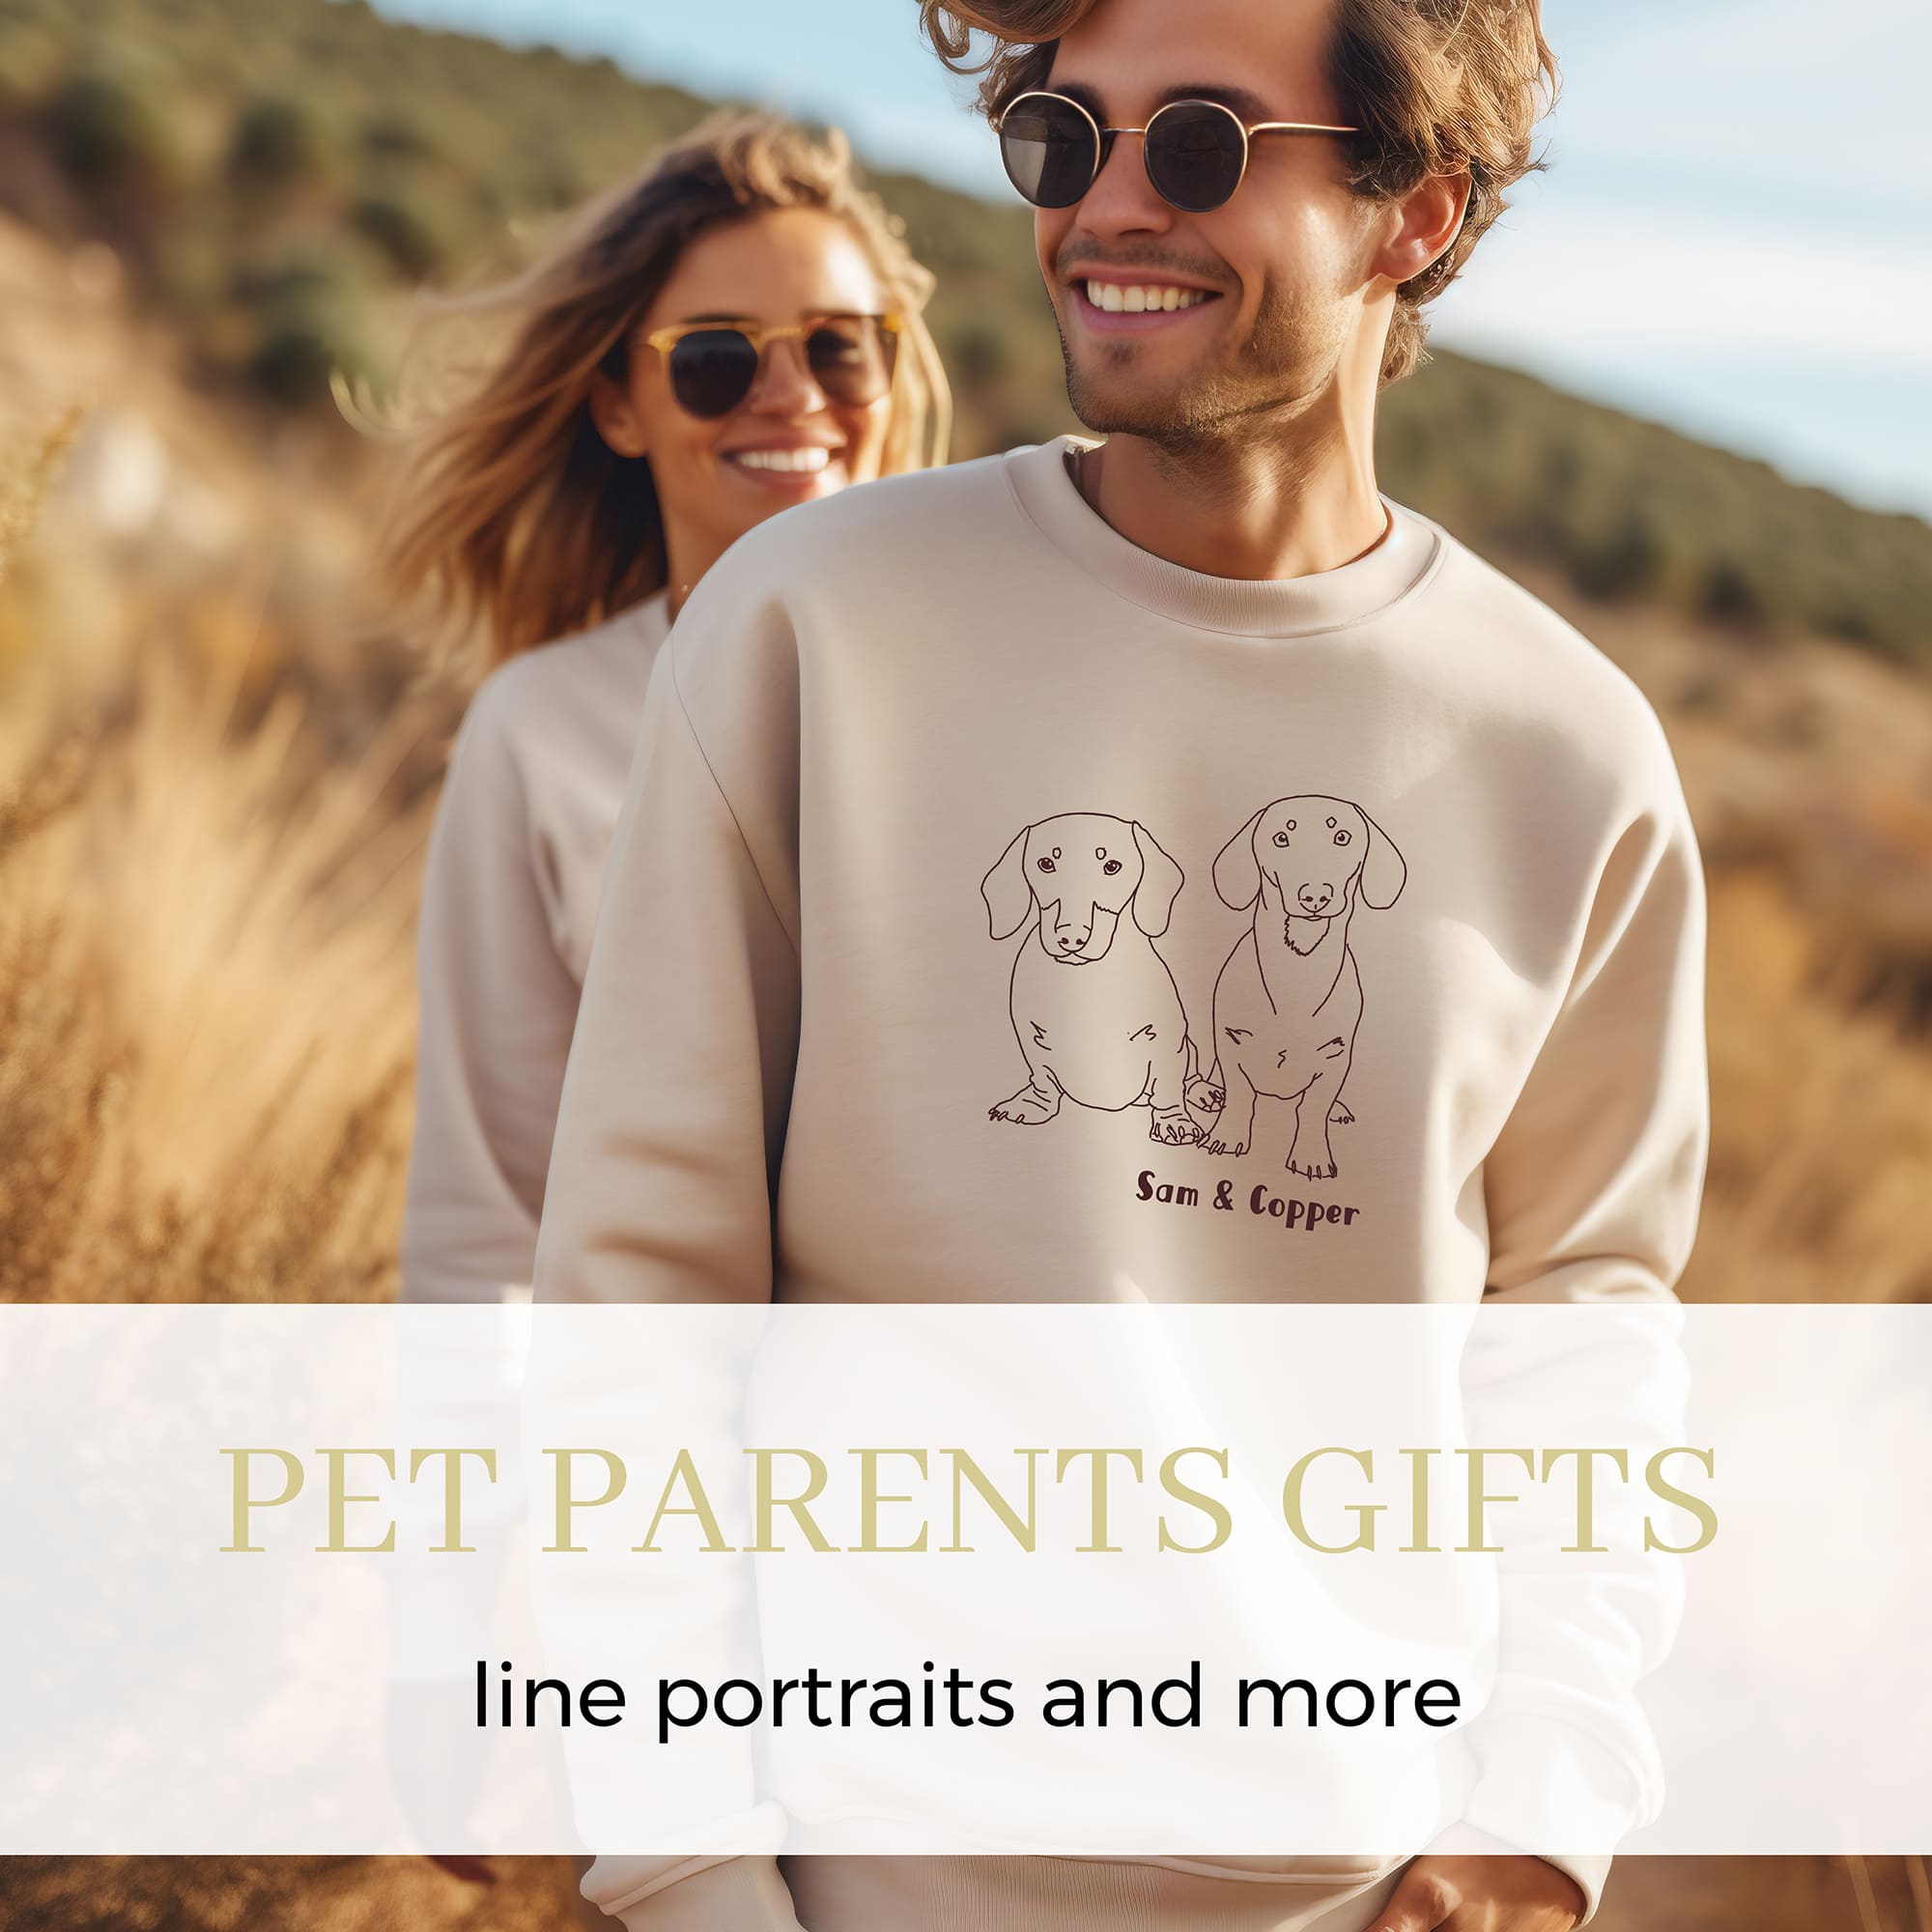 my home and yours custom gifts for pet parents with line portrait illustrations